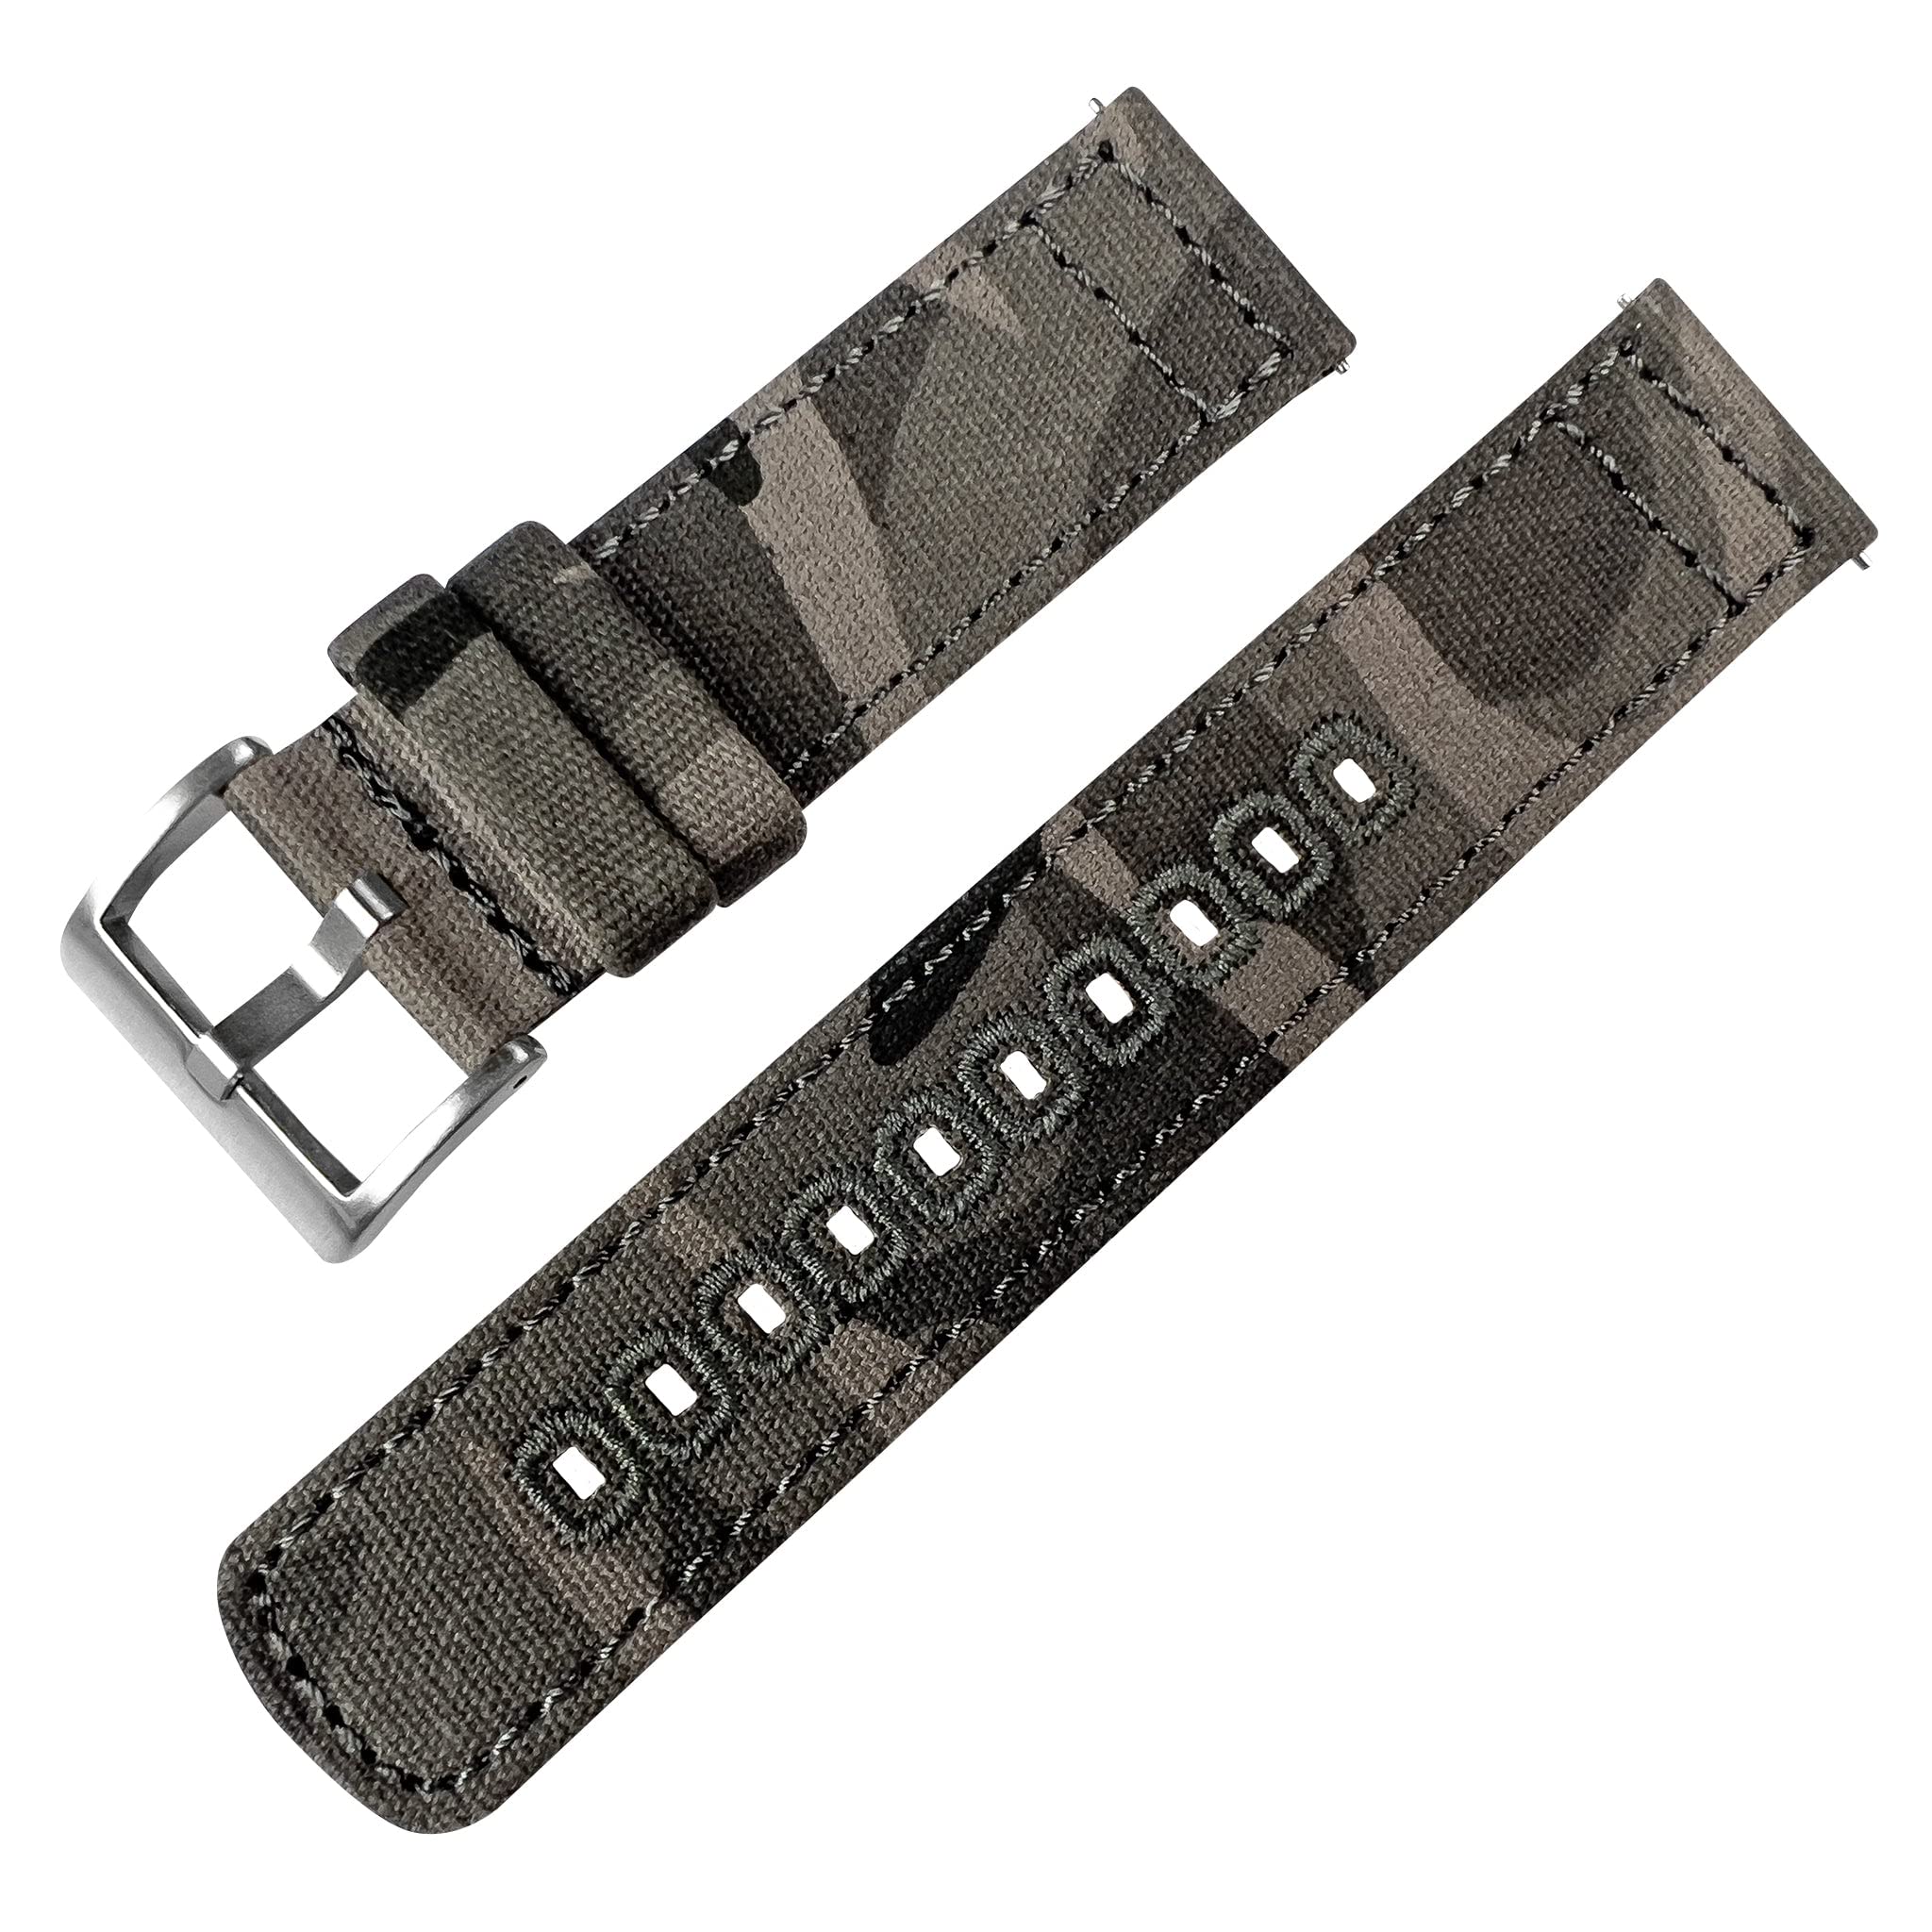 BARTON Camouflage Canvas Quick Release Watch Band Straps - Choose Color & Width - 18mm, 19mm, 20mm, 21mm, 22mm, 23mm, or 24mm